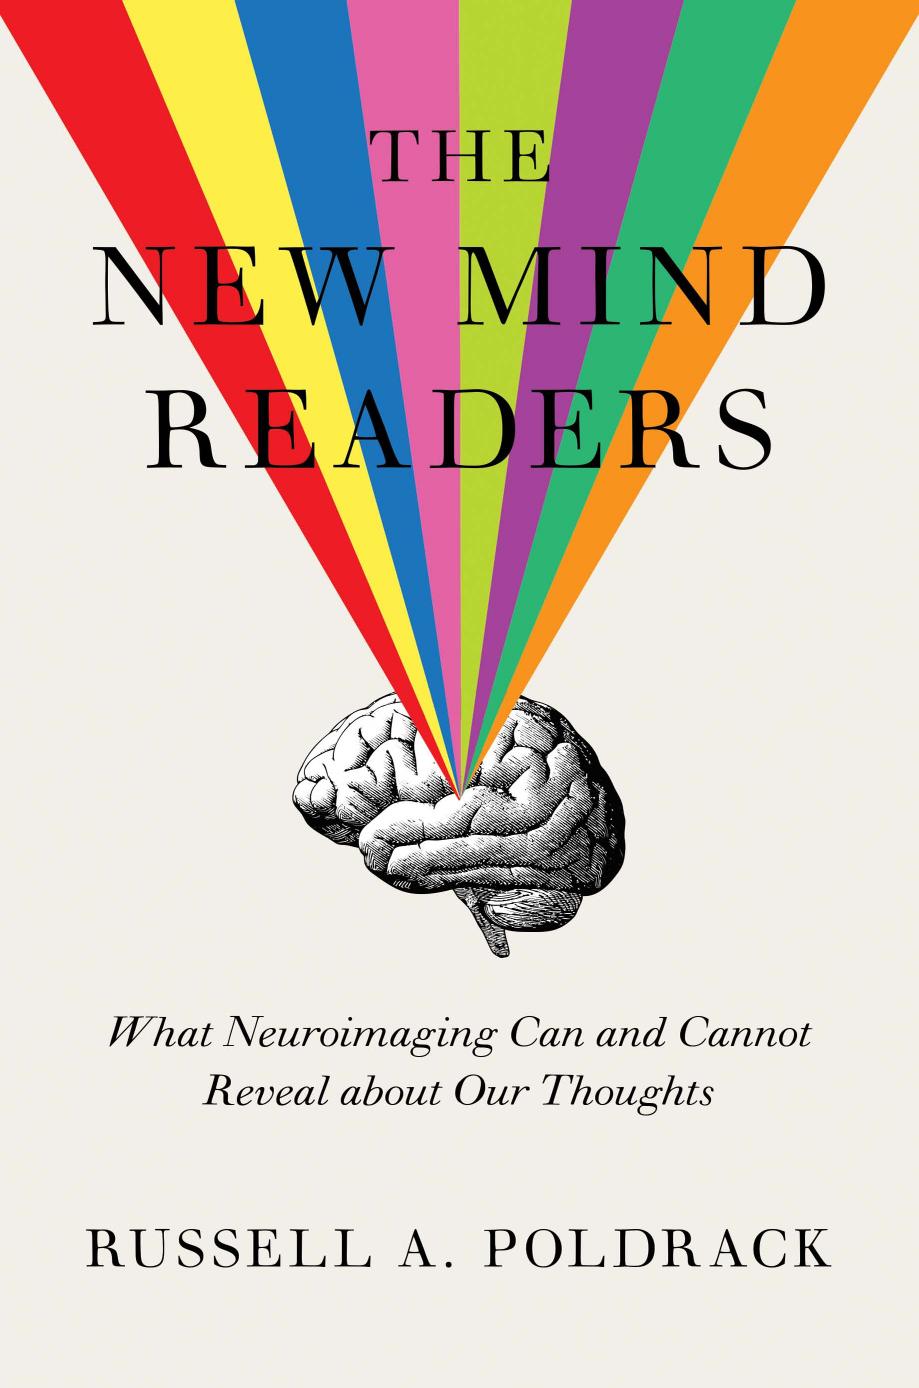 The New Mind Readers by Russell A. Poldrack